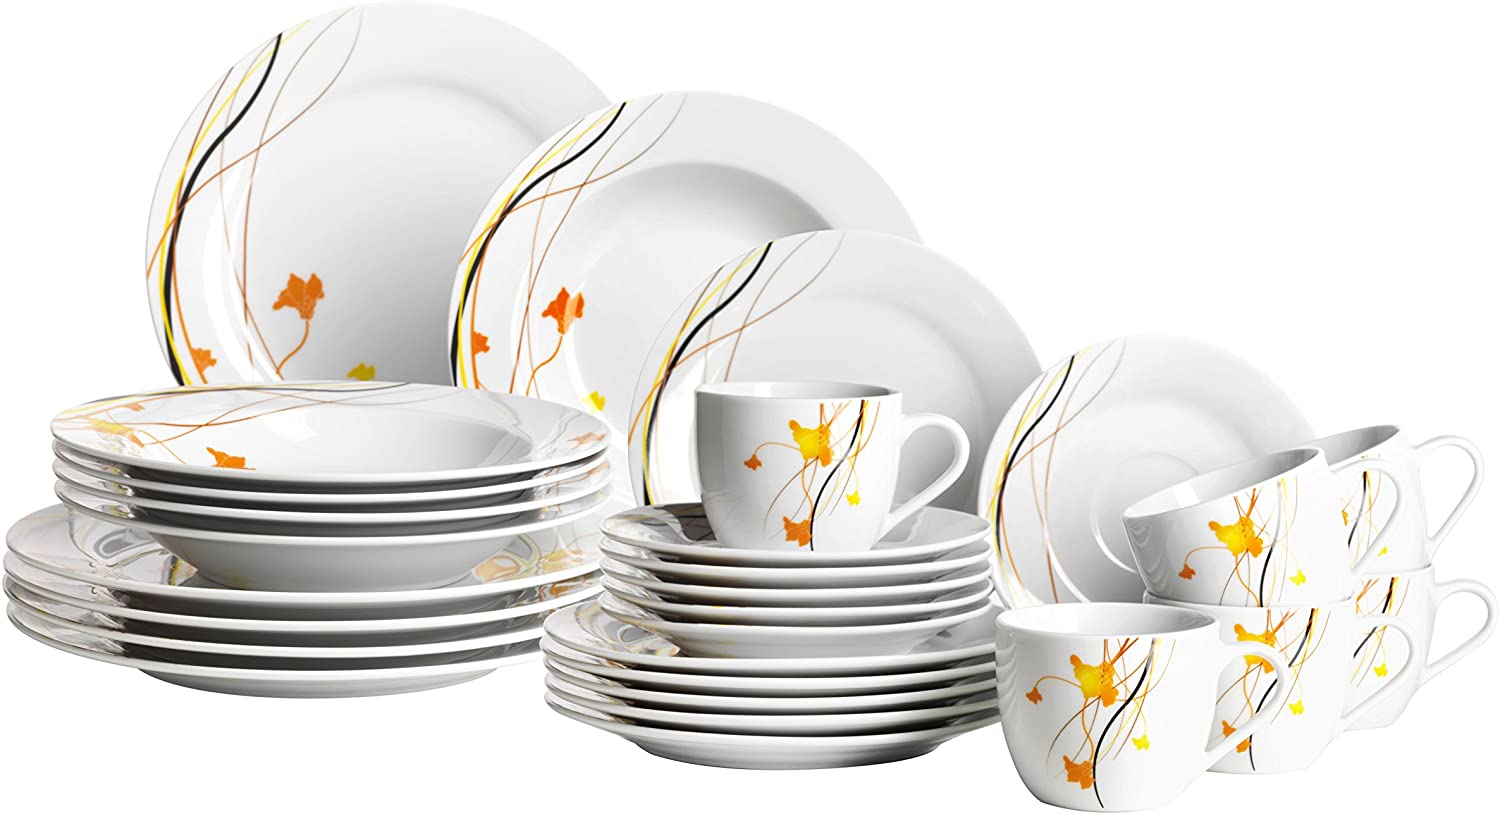 Maser Mäser Domestic Akadien Series Dinner Service with Fresh And Timeless Colours To Make Your Table Shine (30 Pieces)